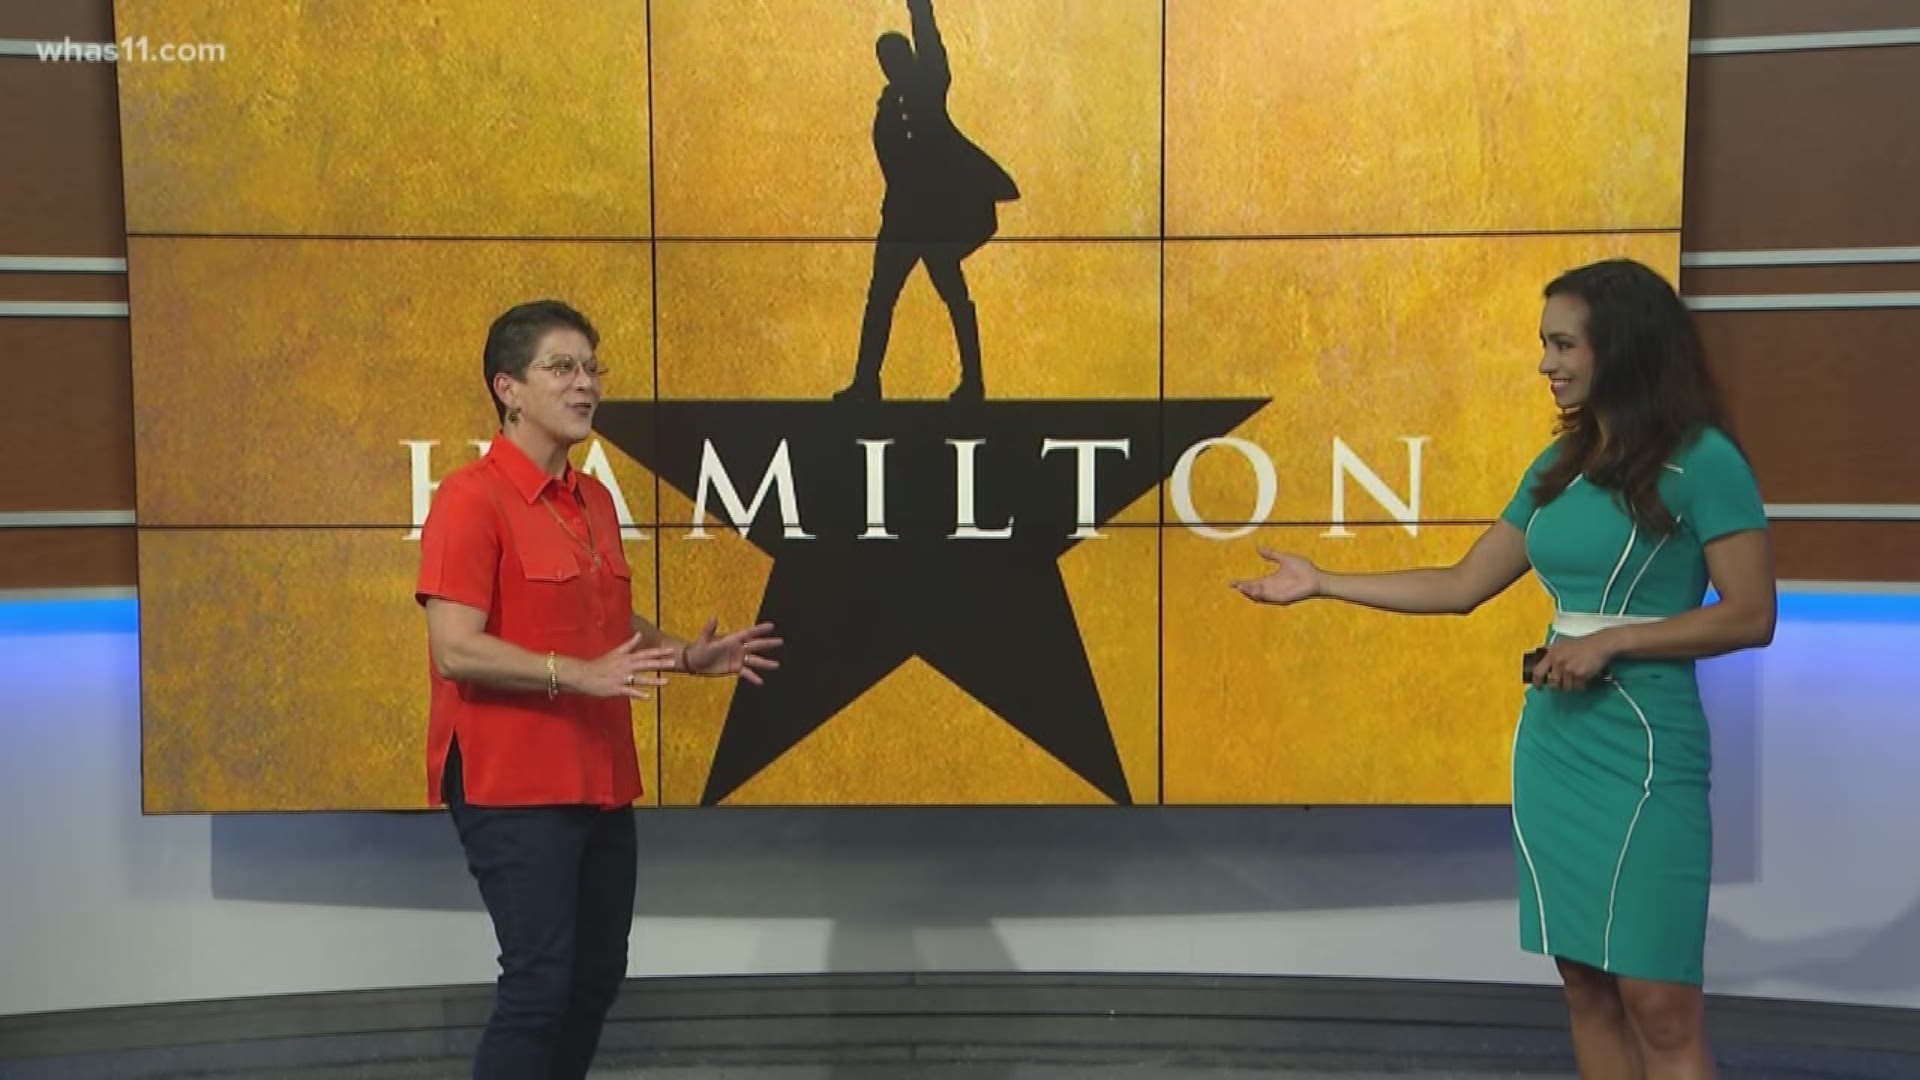 How well did Hamilton do on its first night in Louisville? The President of PNC Broadway in Louisville Leslie Broecker talks about it.